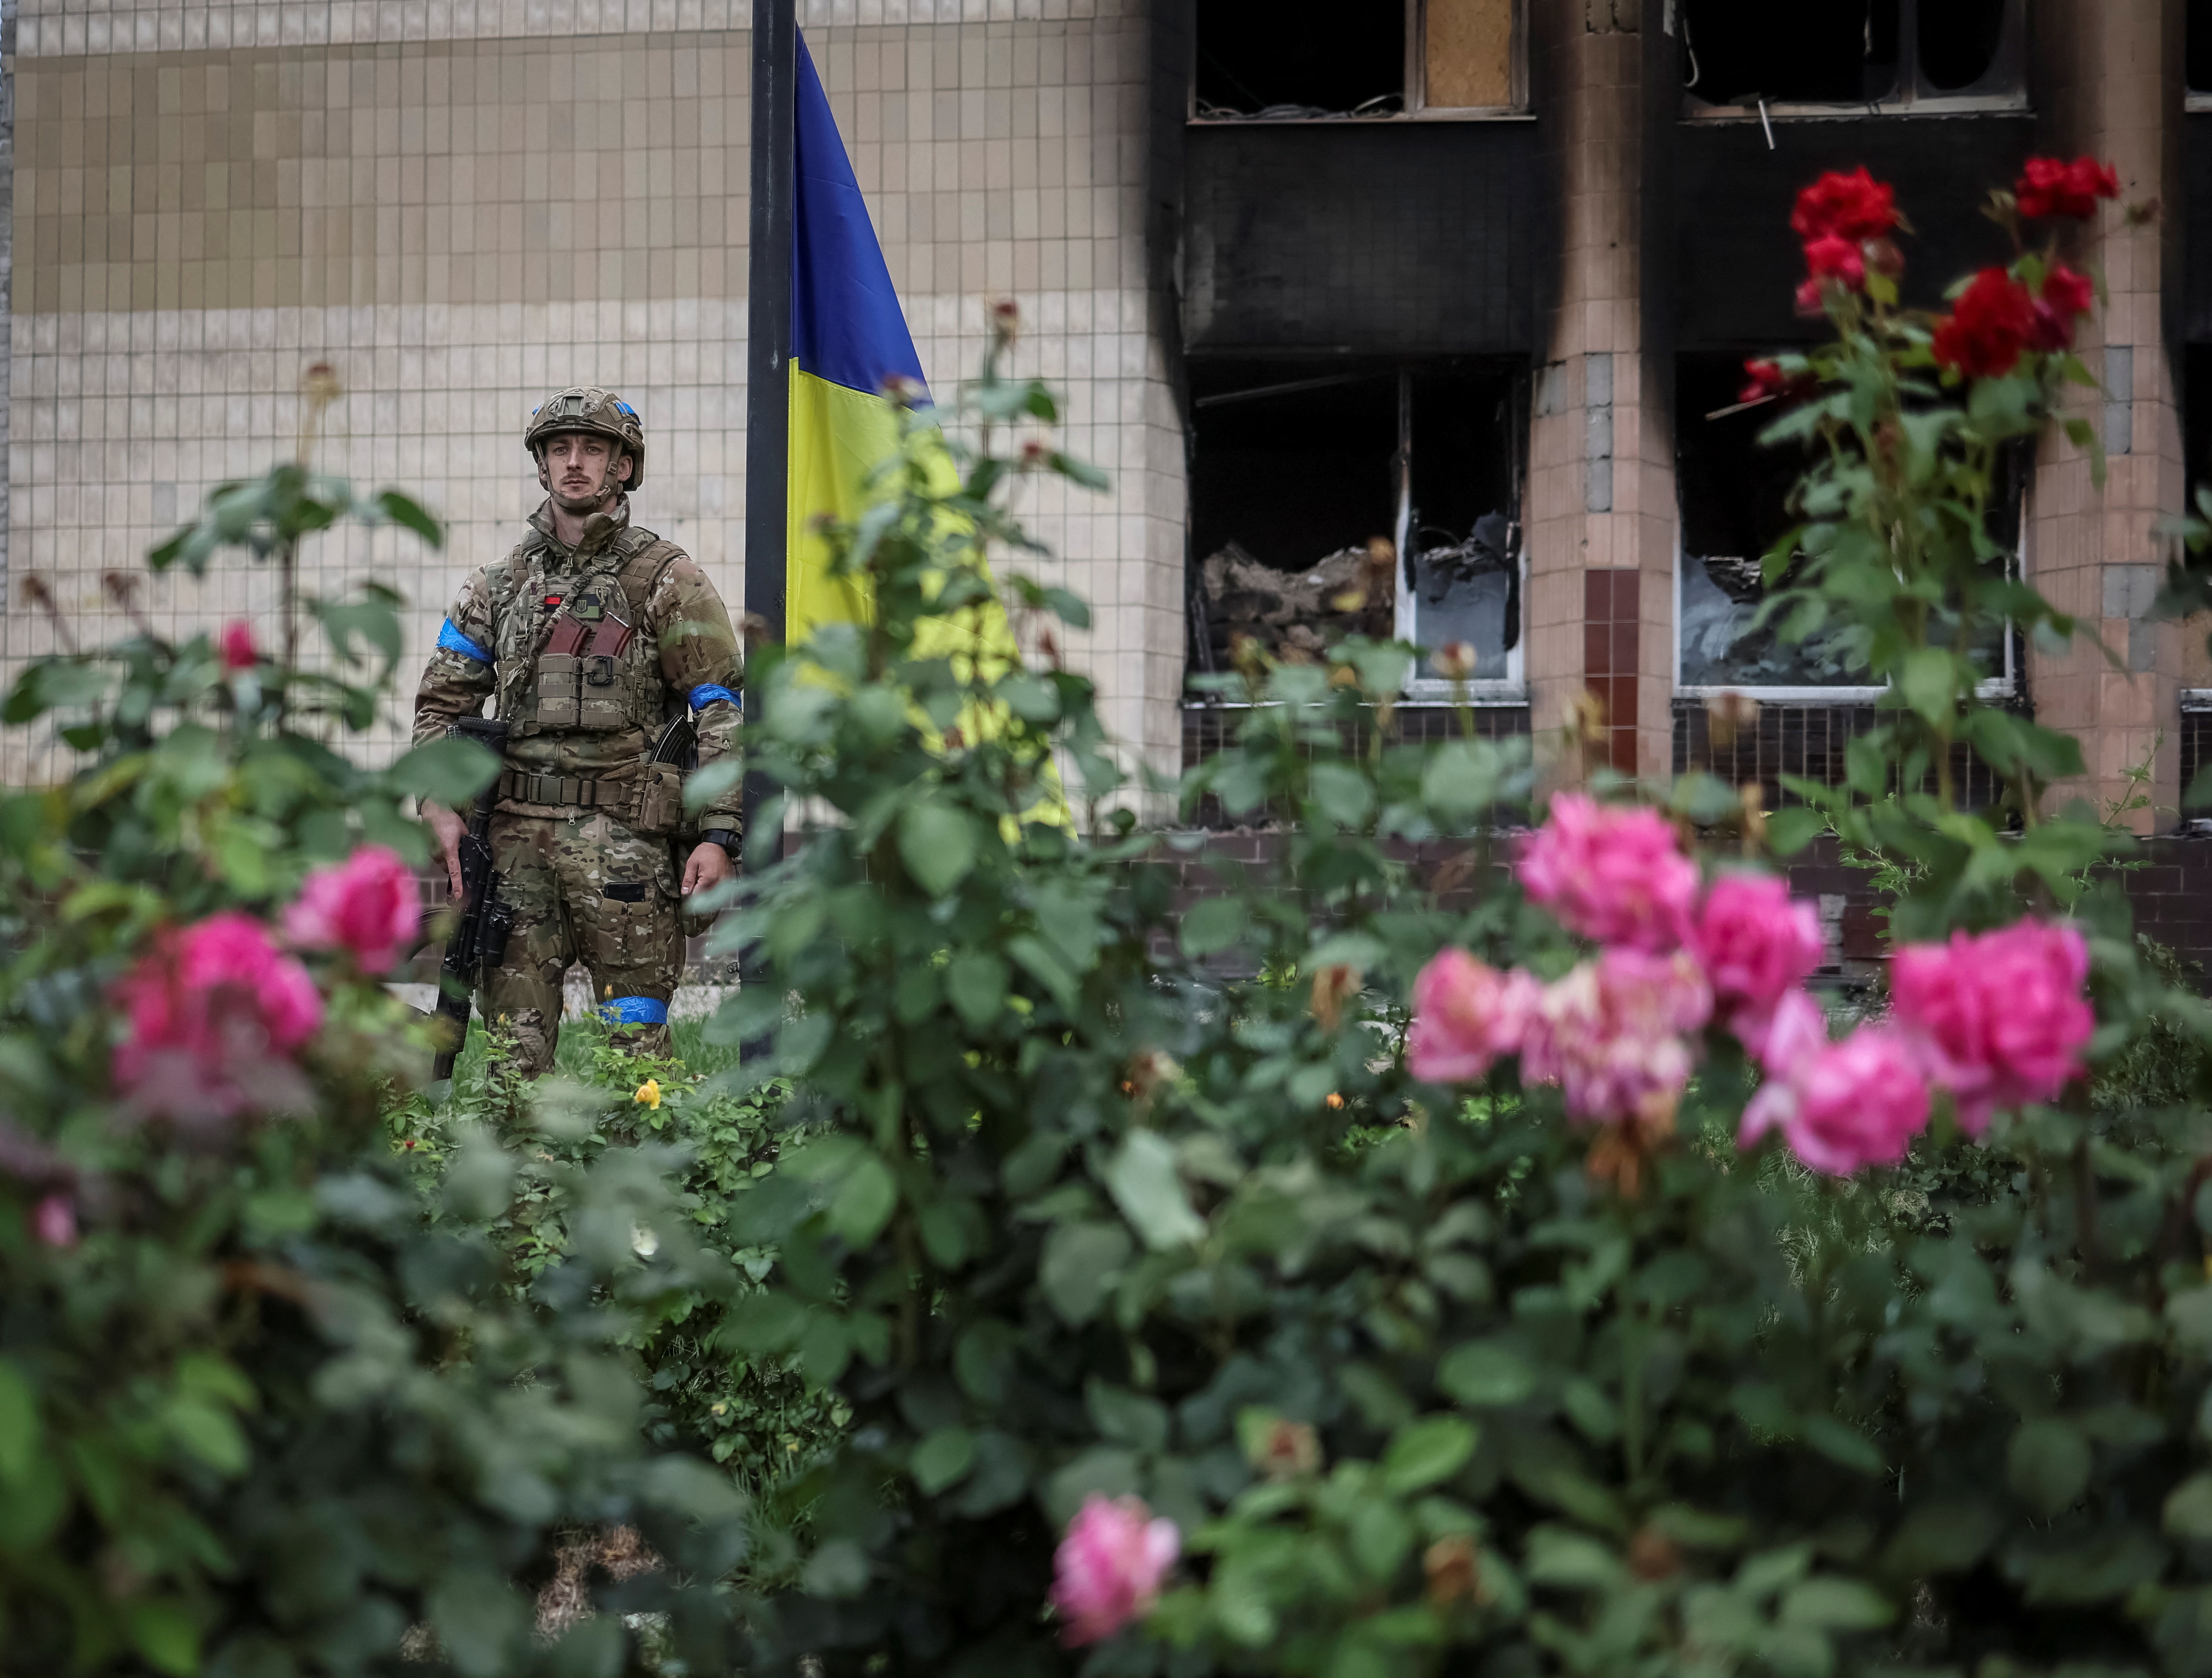 Ukrainian serviceman attends a national flag raising ceremony in the town of Izium